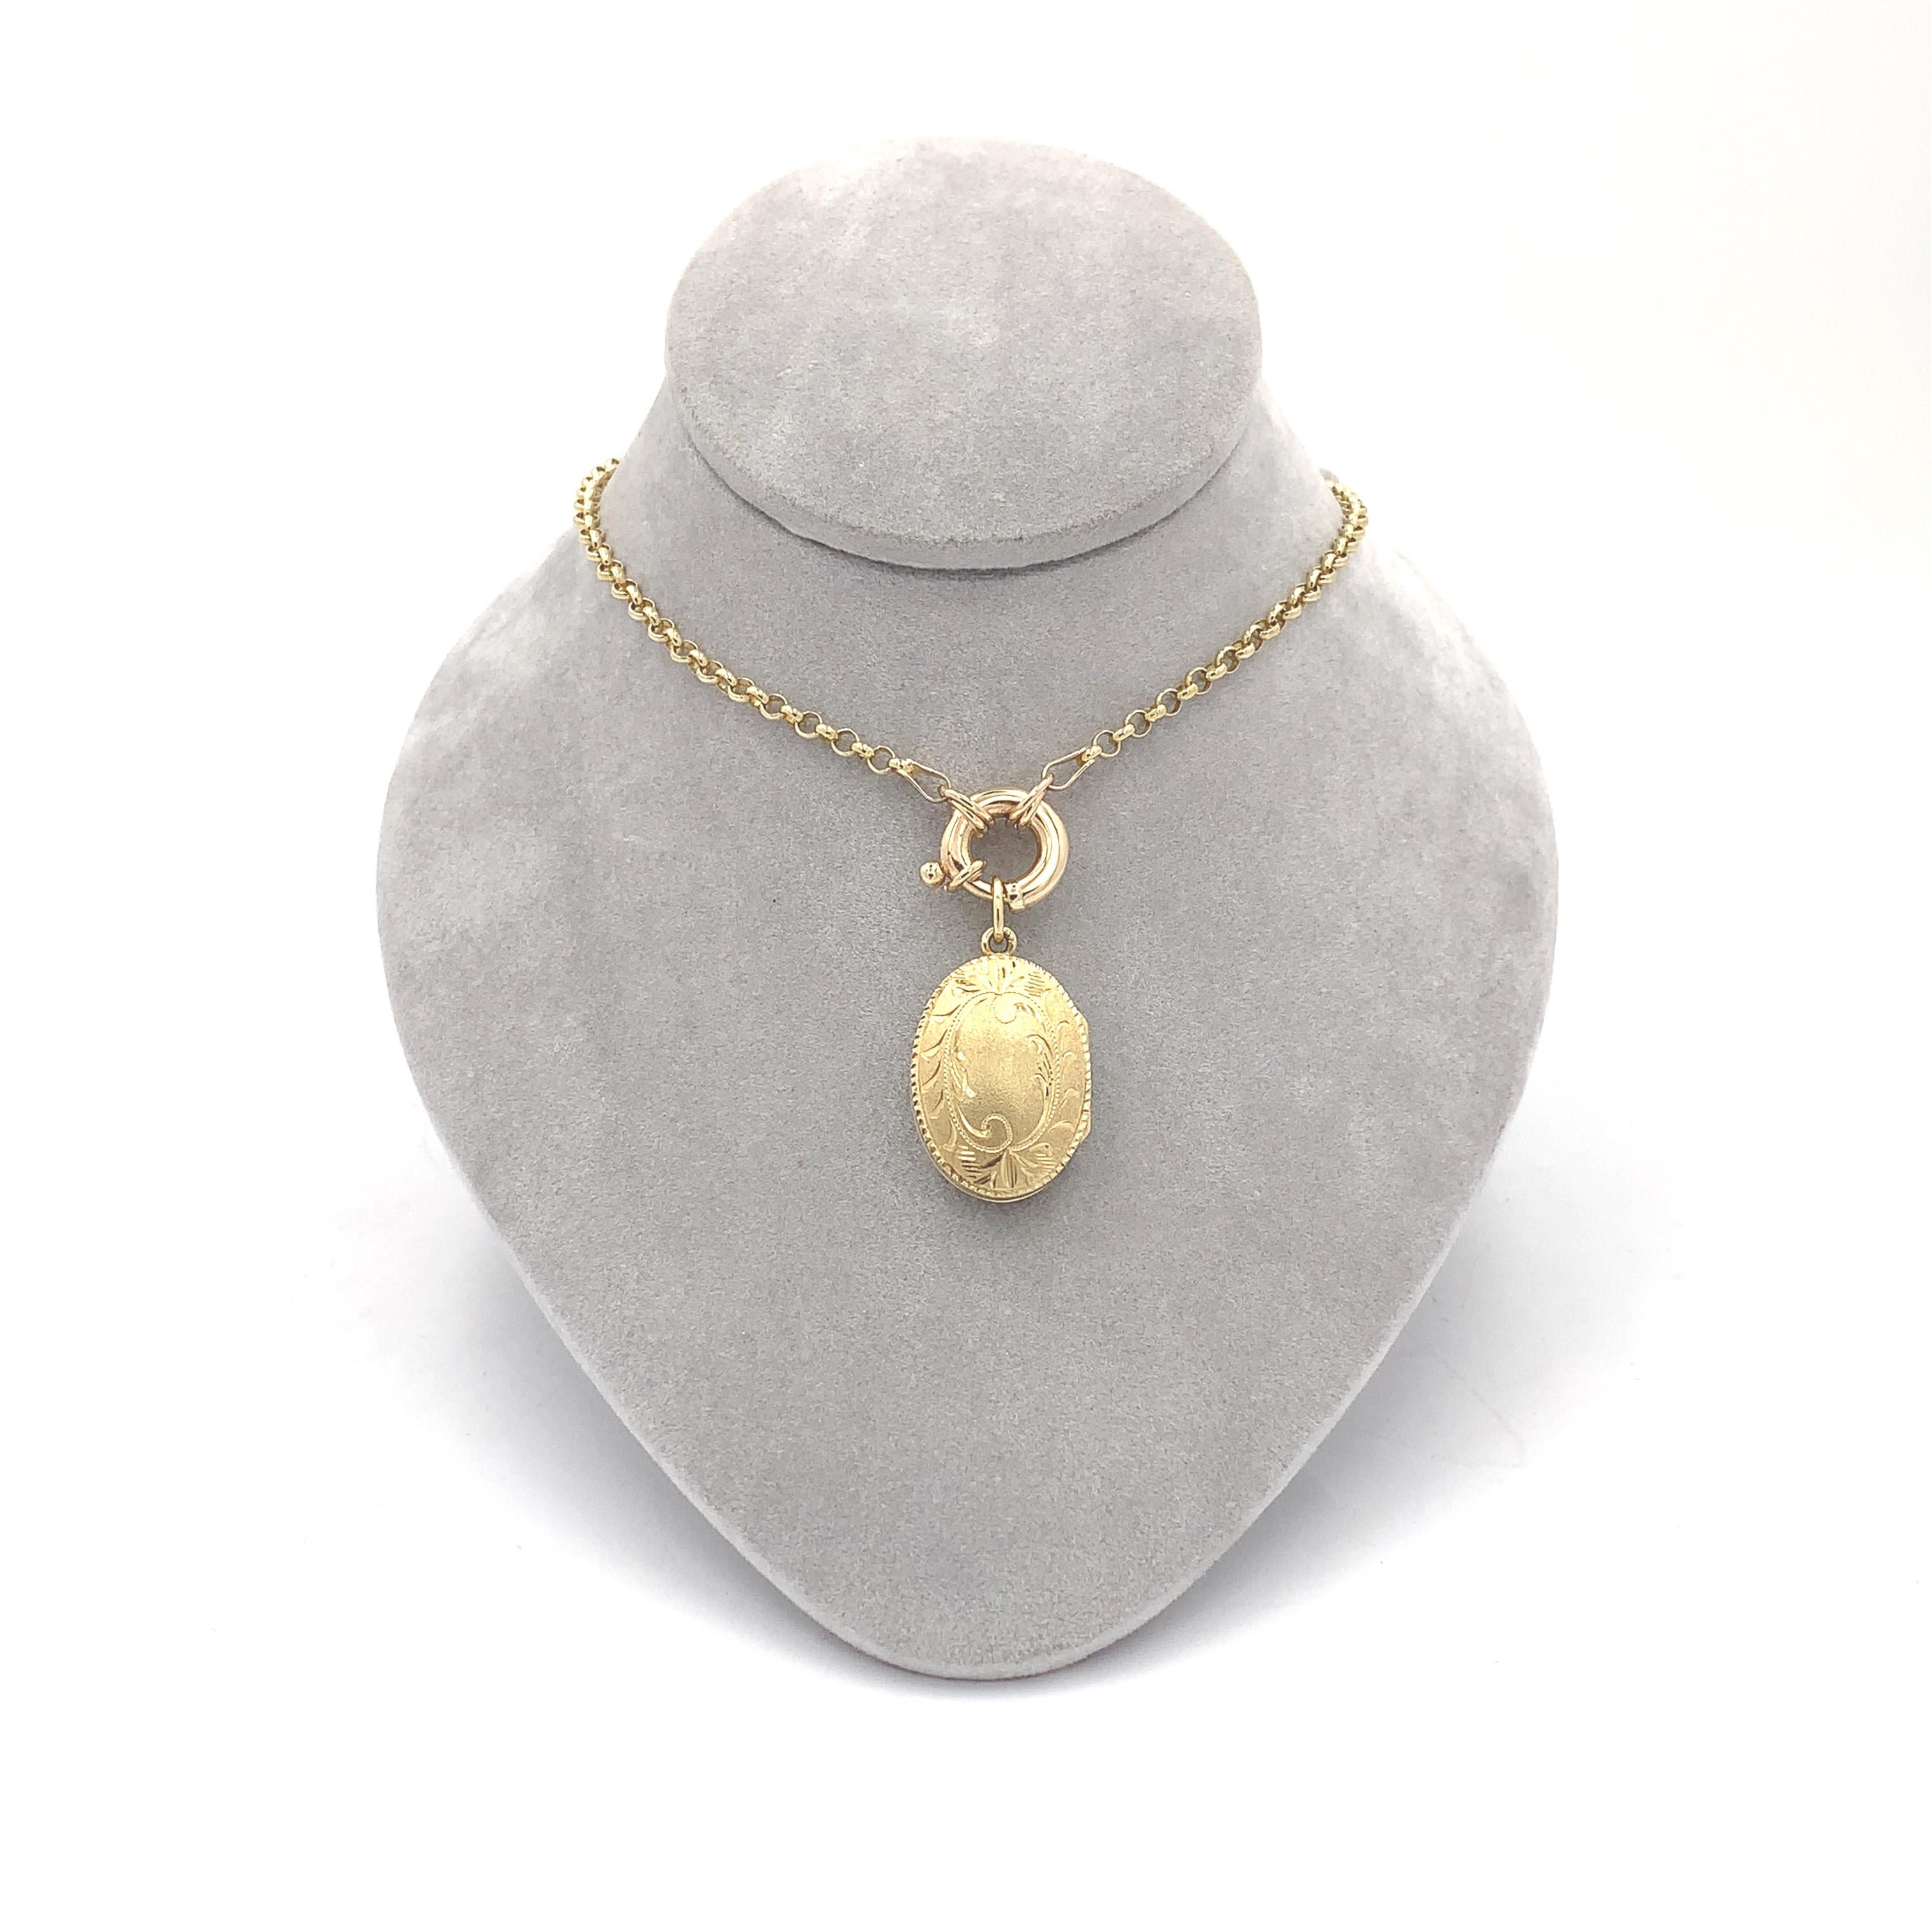 Women's 14K Yellow Gold Oval Locket with Decorative Heavy Chain For Sale